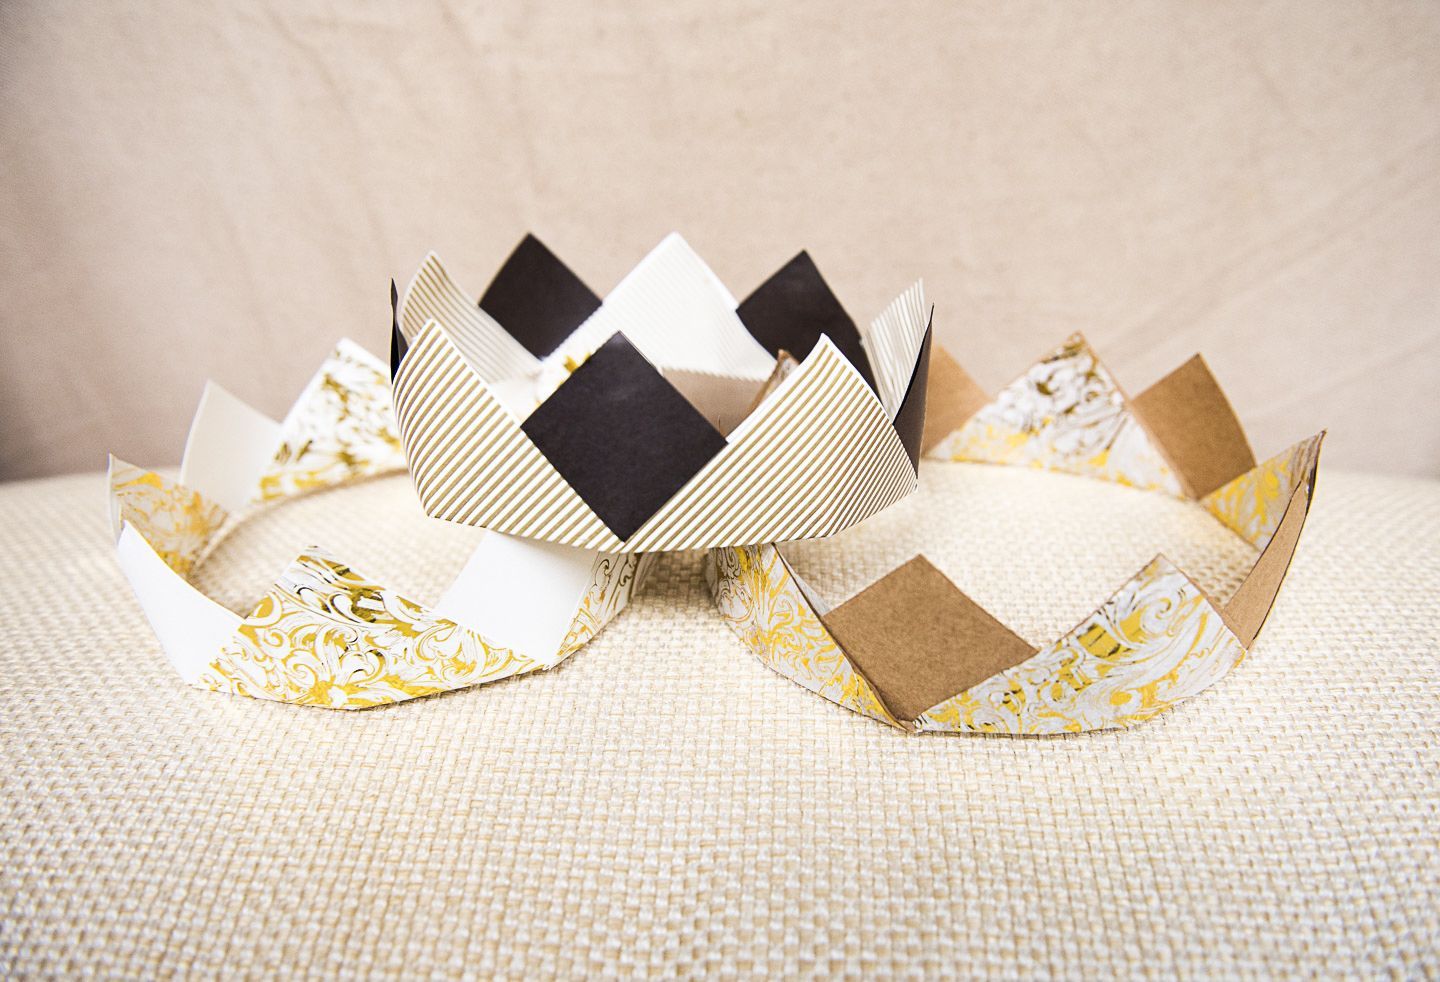 3 DIY Paper Crowns from Upcycled Wrapping Paper - 3 DIY Paper Crowns from Upcycled Wrapping Paper -   18 diy Paper crown ideas